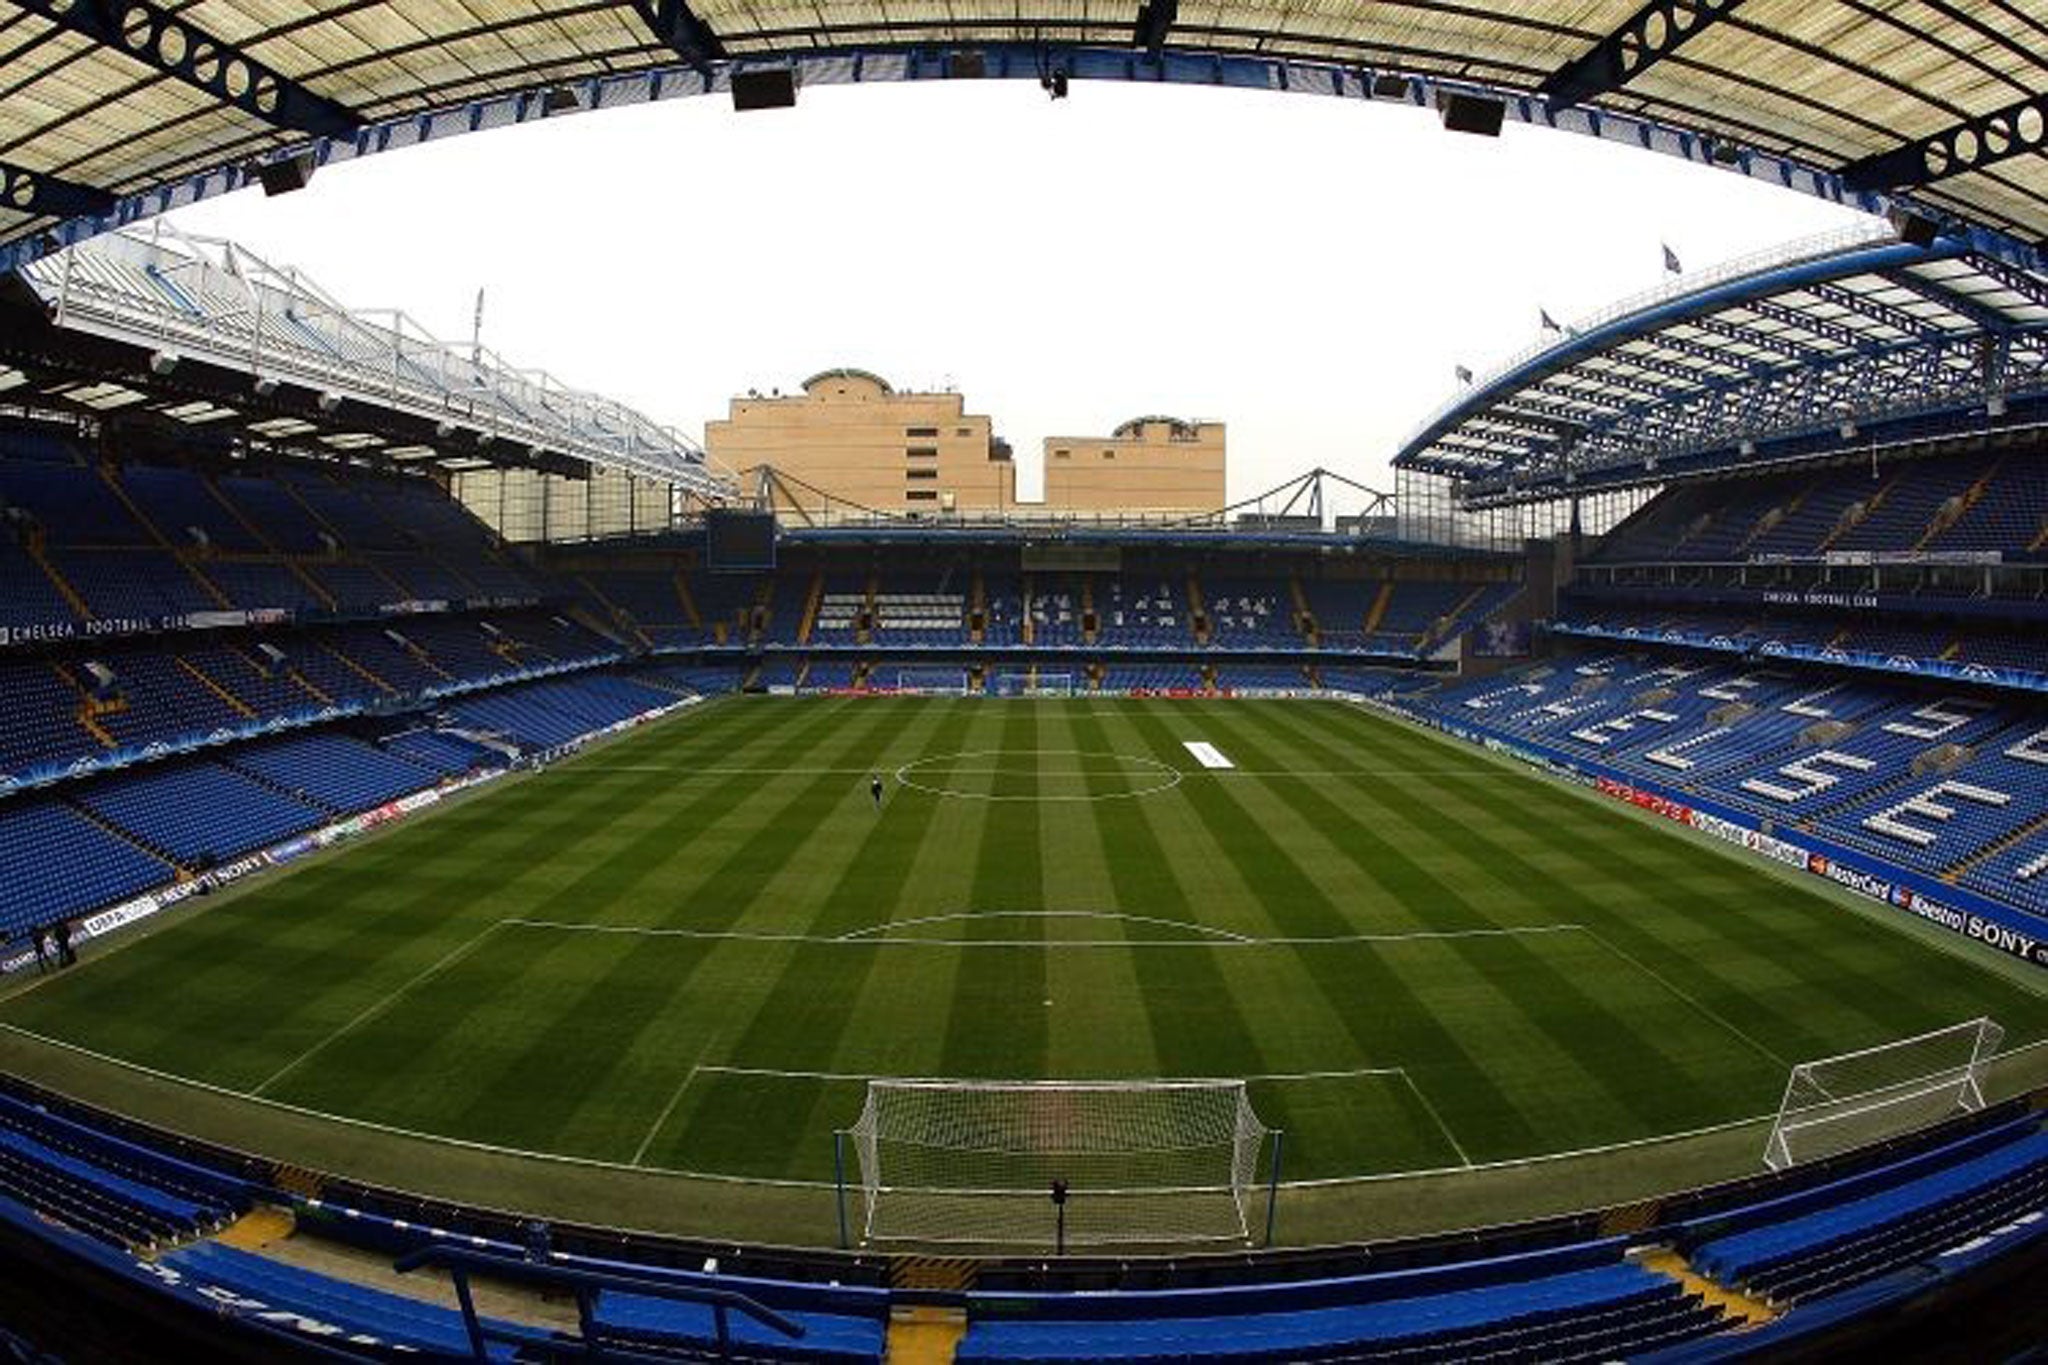 House prices near Chelsea's Stamford Bridge are really kicking on